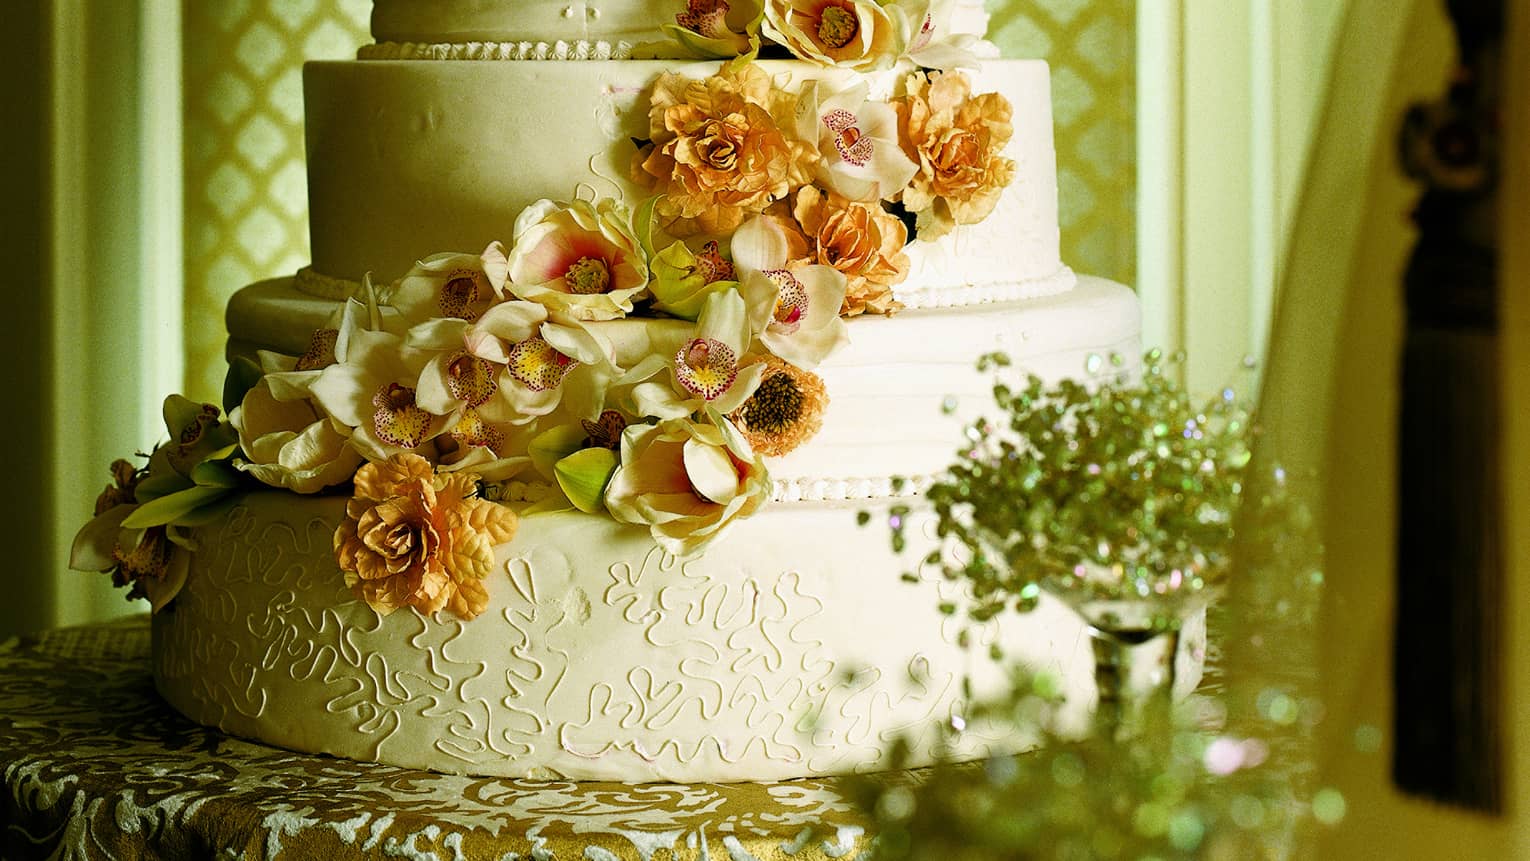 Wedding cake with seven tiers, peach and white roses 